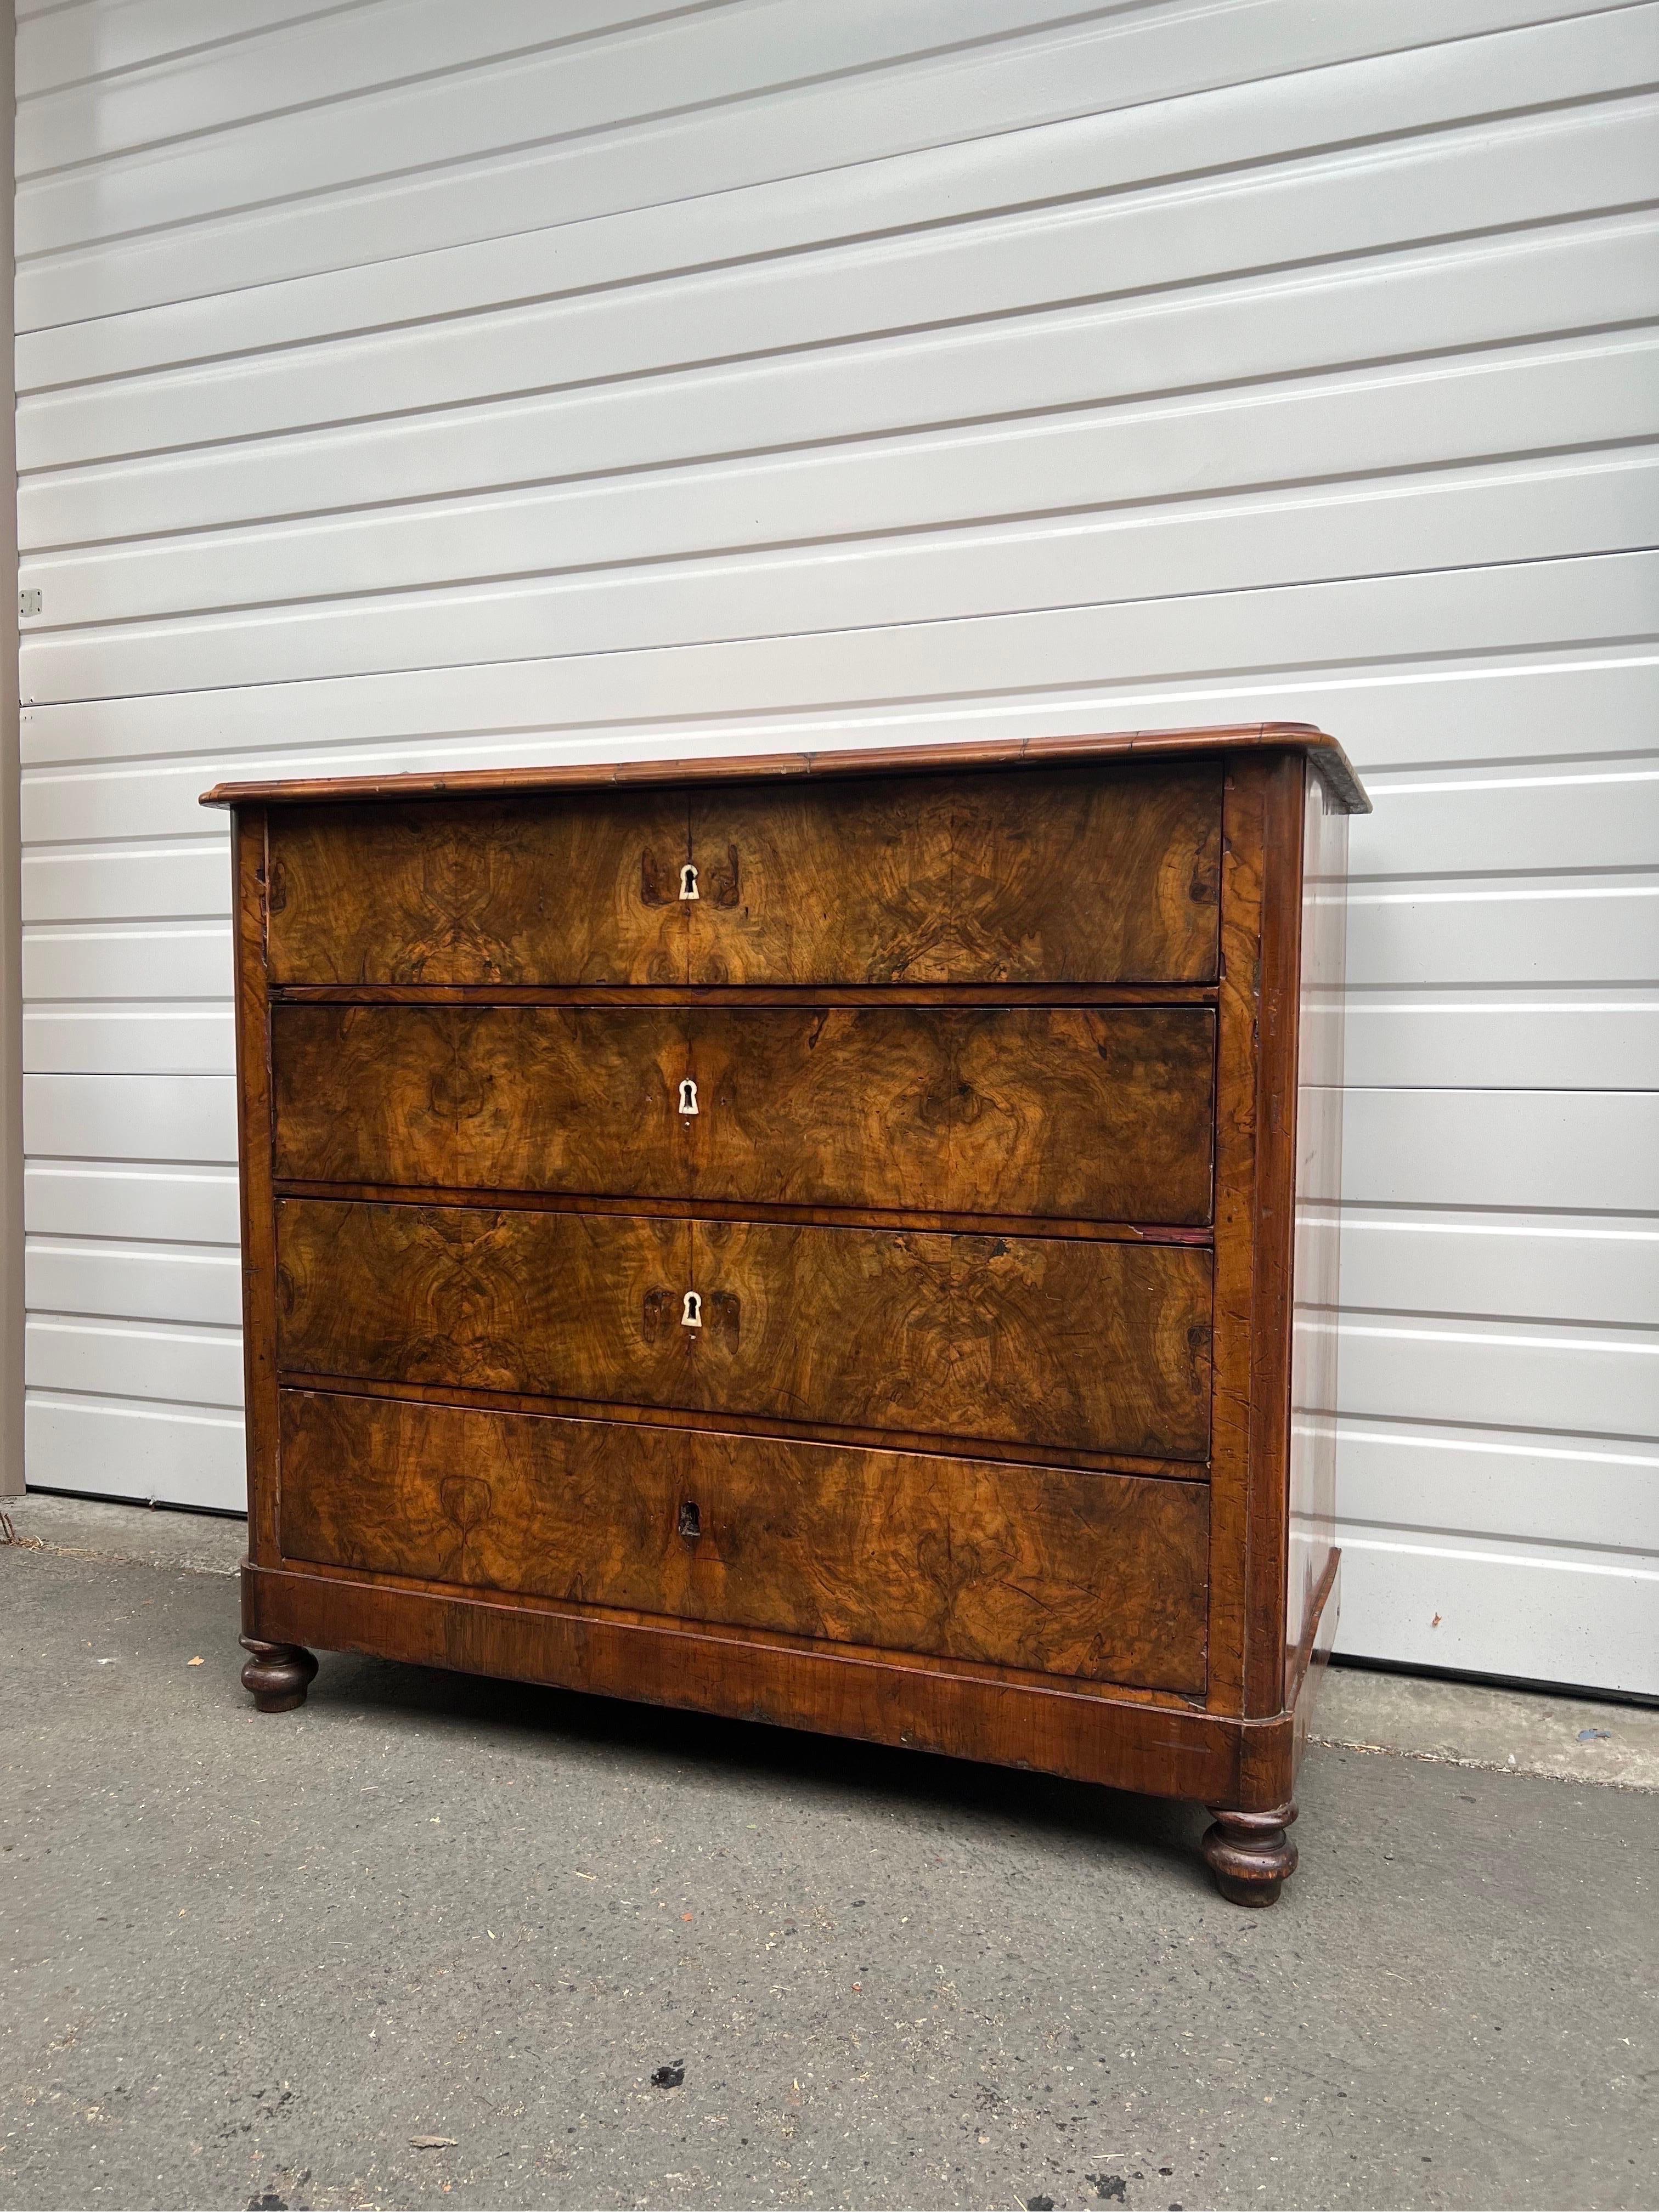 Commode Or Dresser with 4 Large Drawers In Style Of Noble Biedermeier Furniture With Hand Cut Dovetail Drawers Details. Features an iPhone and Elegantly made And Carefully Selected Walnut Grain/Burl Veneer Which Extends overall all Four Drawers.